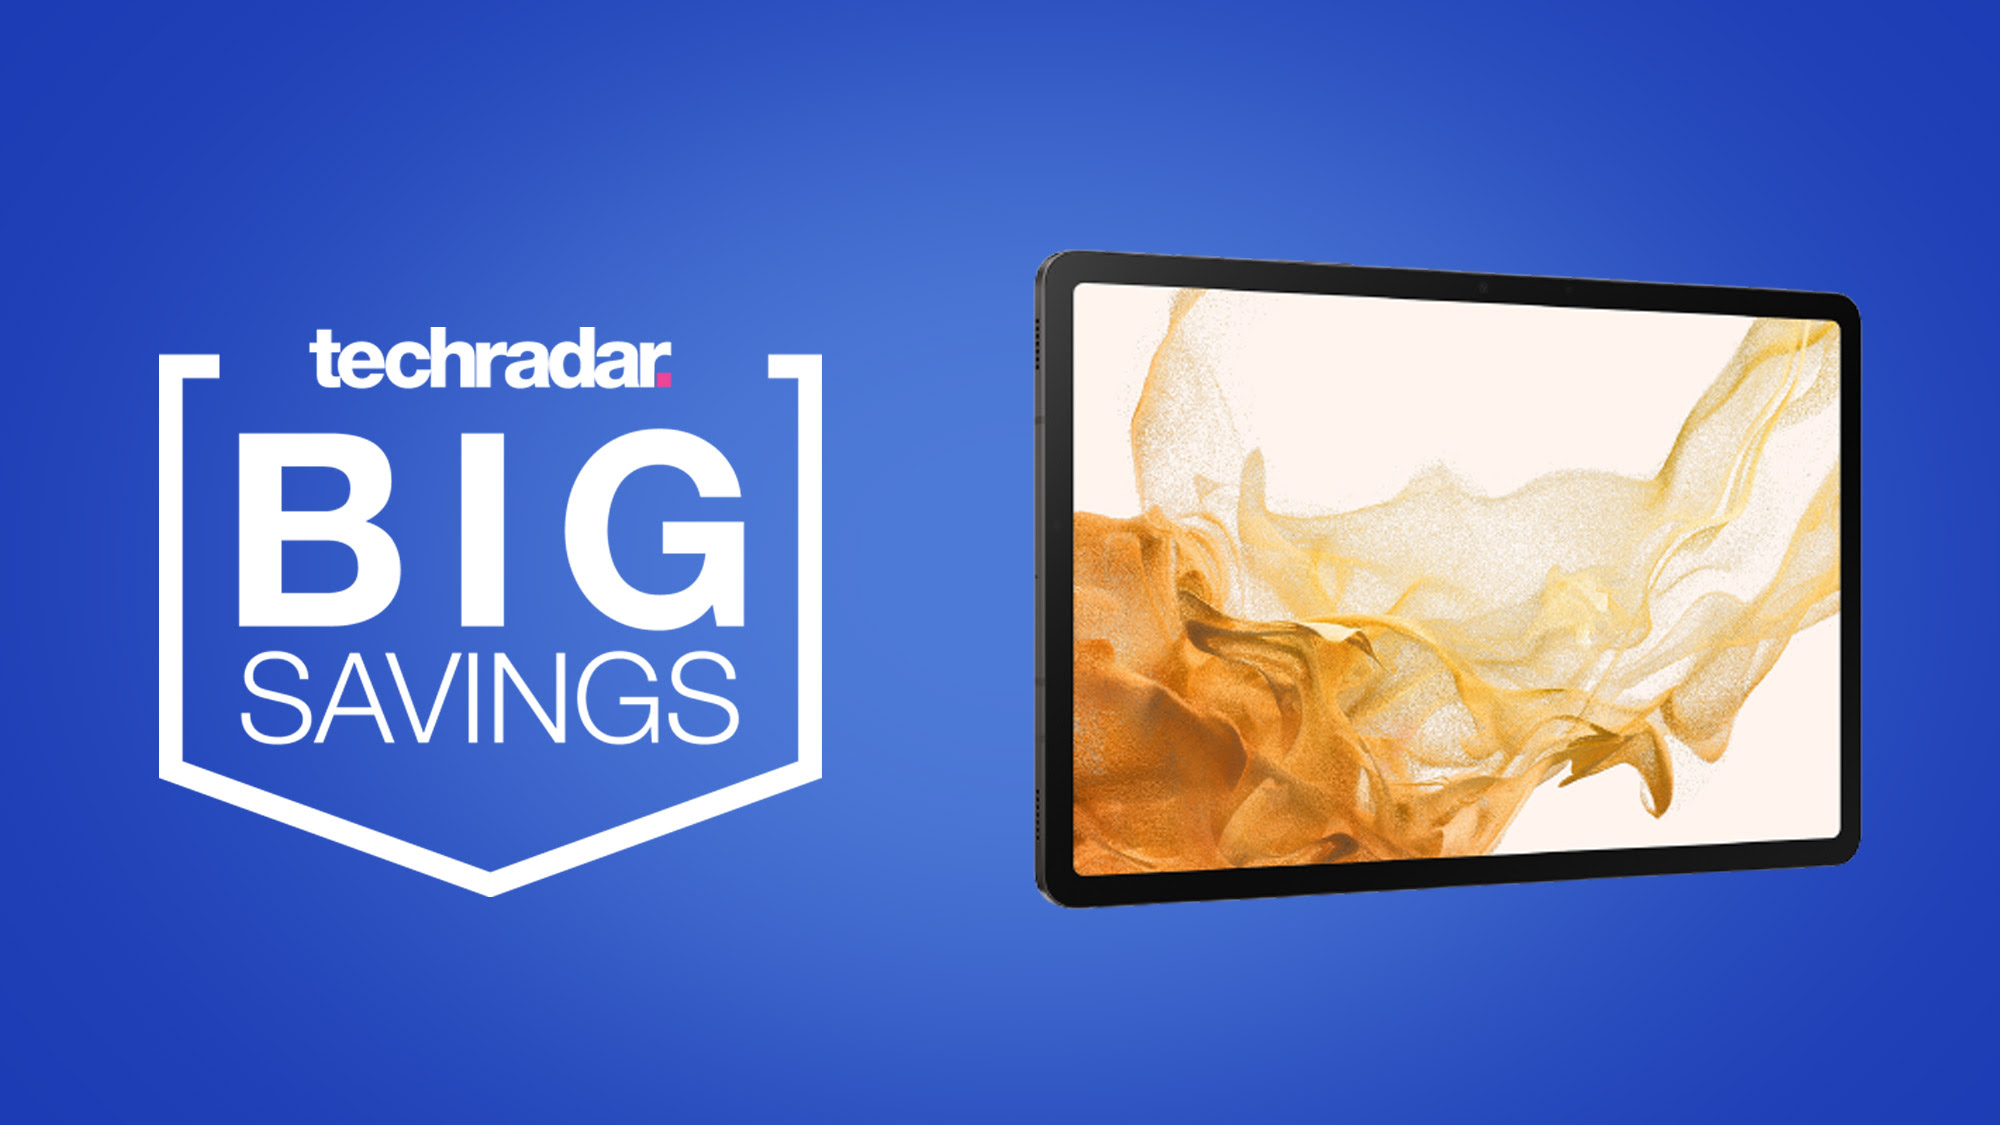 Samsung Galaxy Tab S8 is now a massive £250 off when you trade in any old tablet